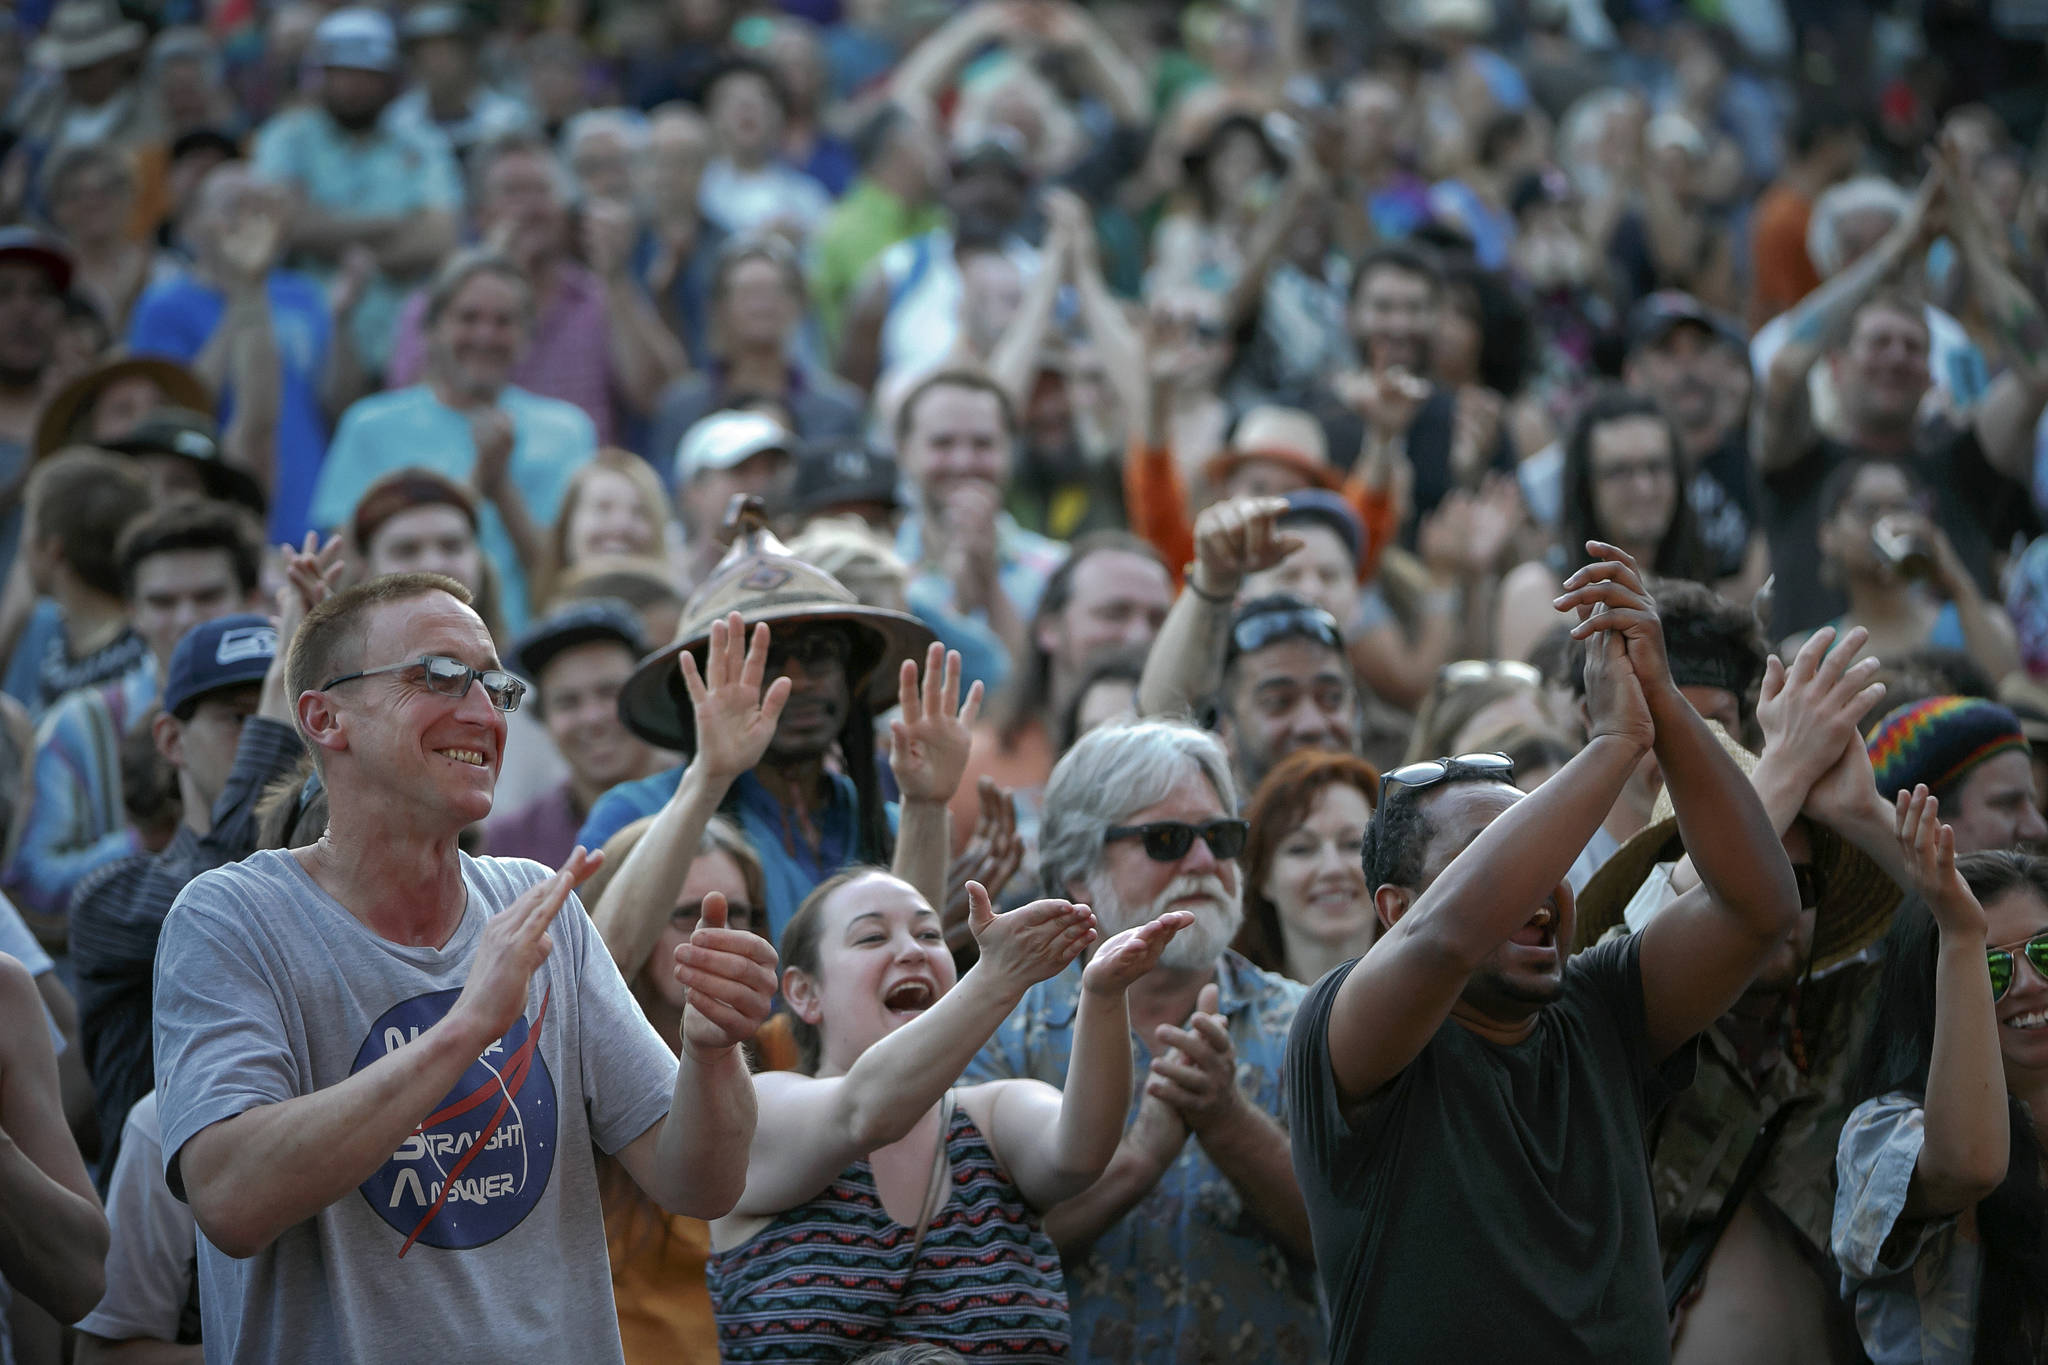 The crowd goes wild at the Northwest Folklife Festival. Photo by Christopher Nelson